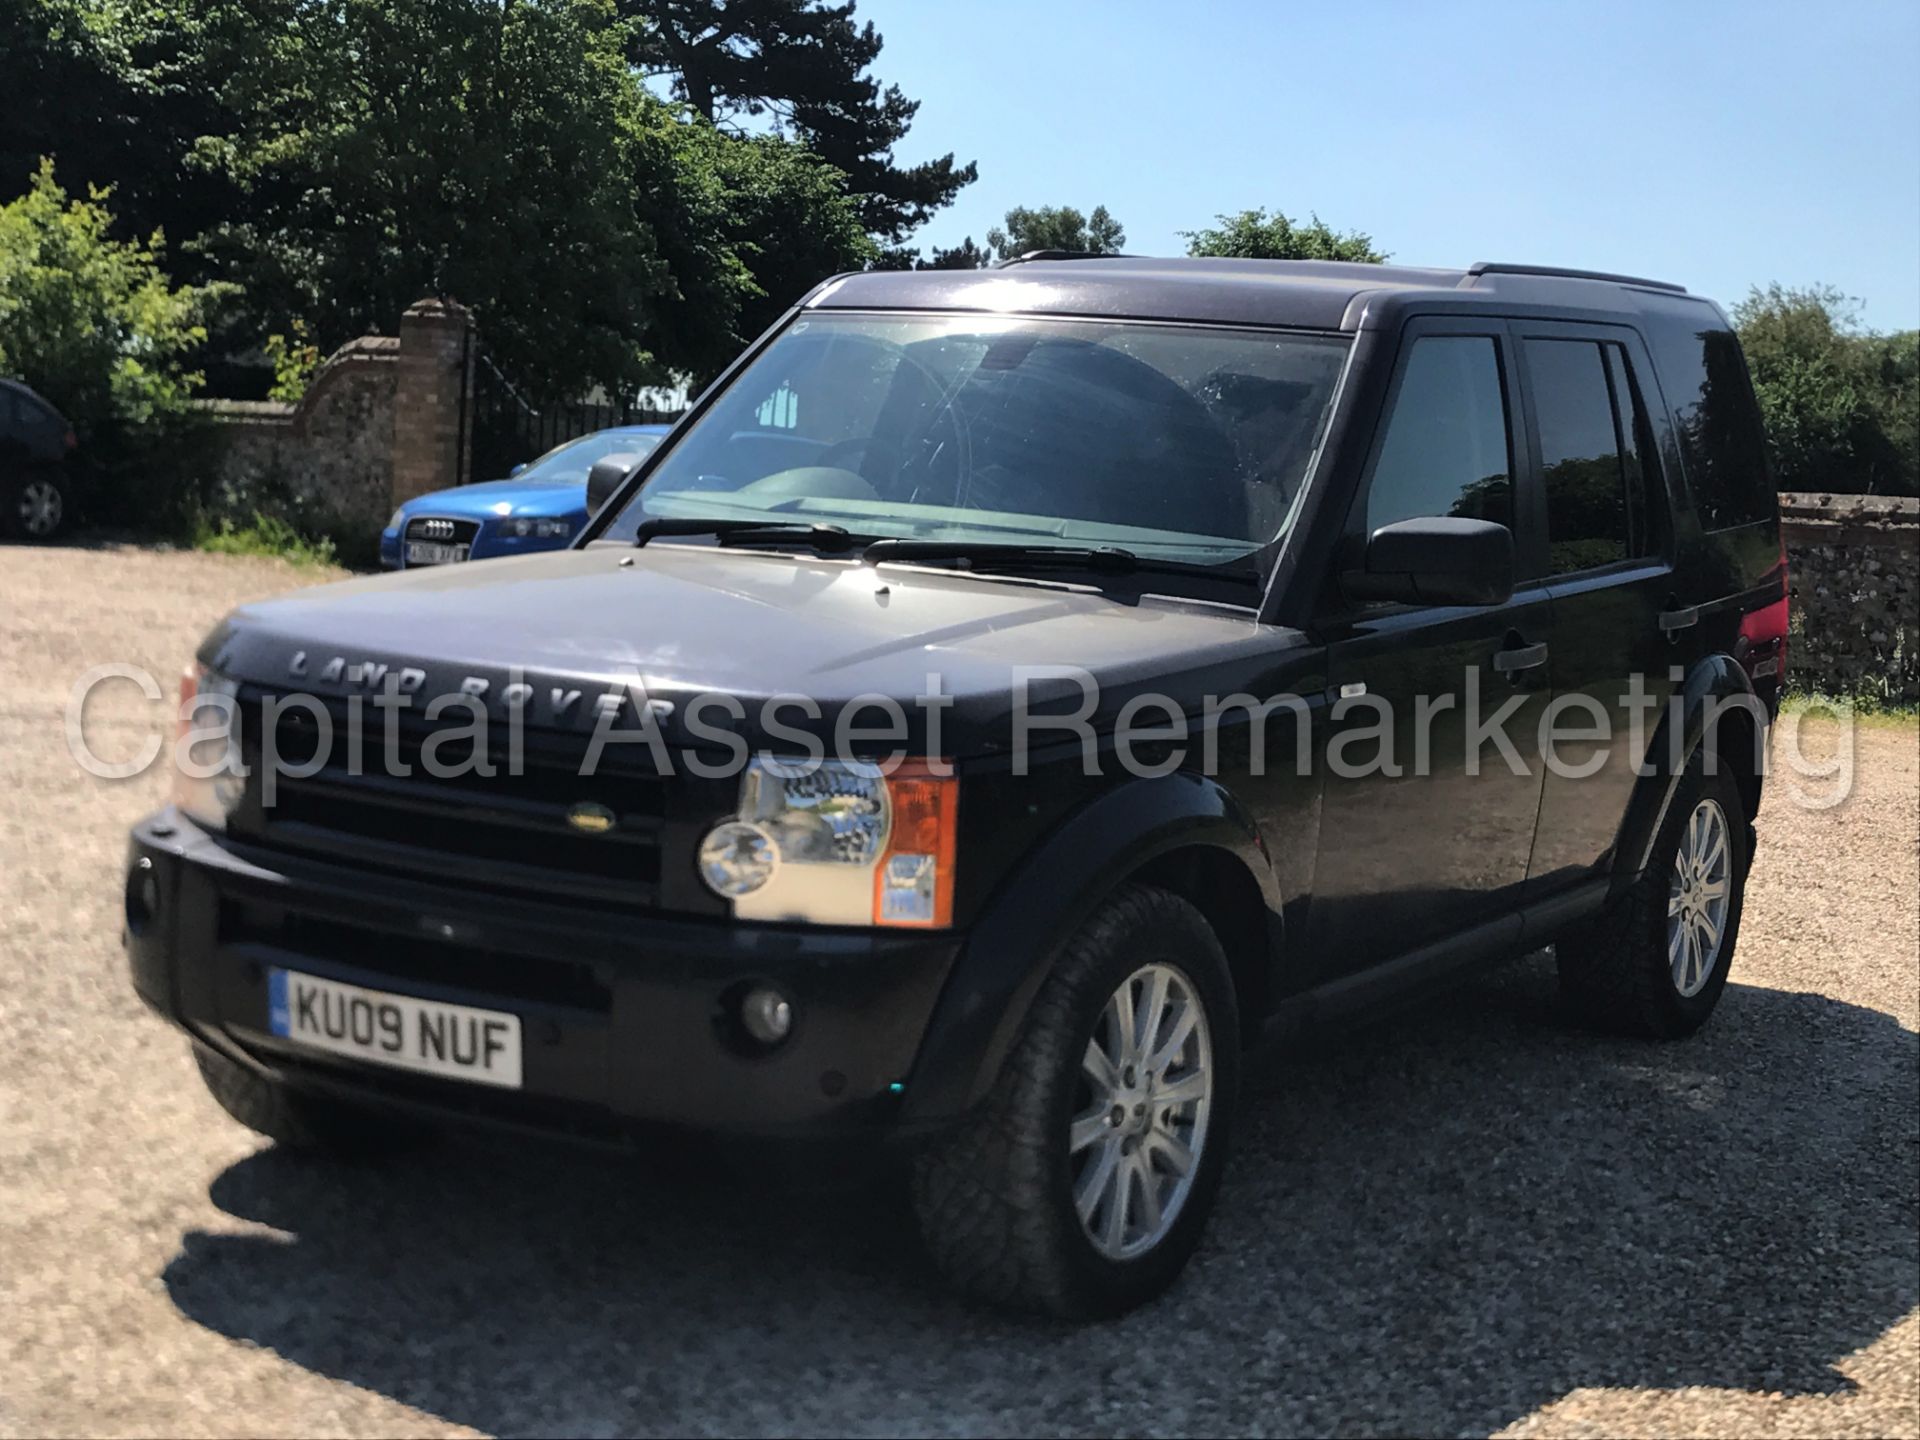 LAND ROVER DISCOVERY 3 'SE' (2009) '2.7 TDV6 - AUTO - LEATHER - SAT NAV - 7 SEATER' (NO VAT) - Image 2 of 31